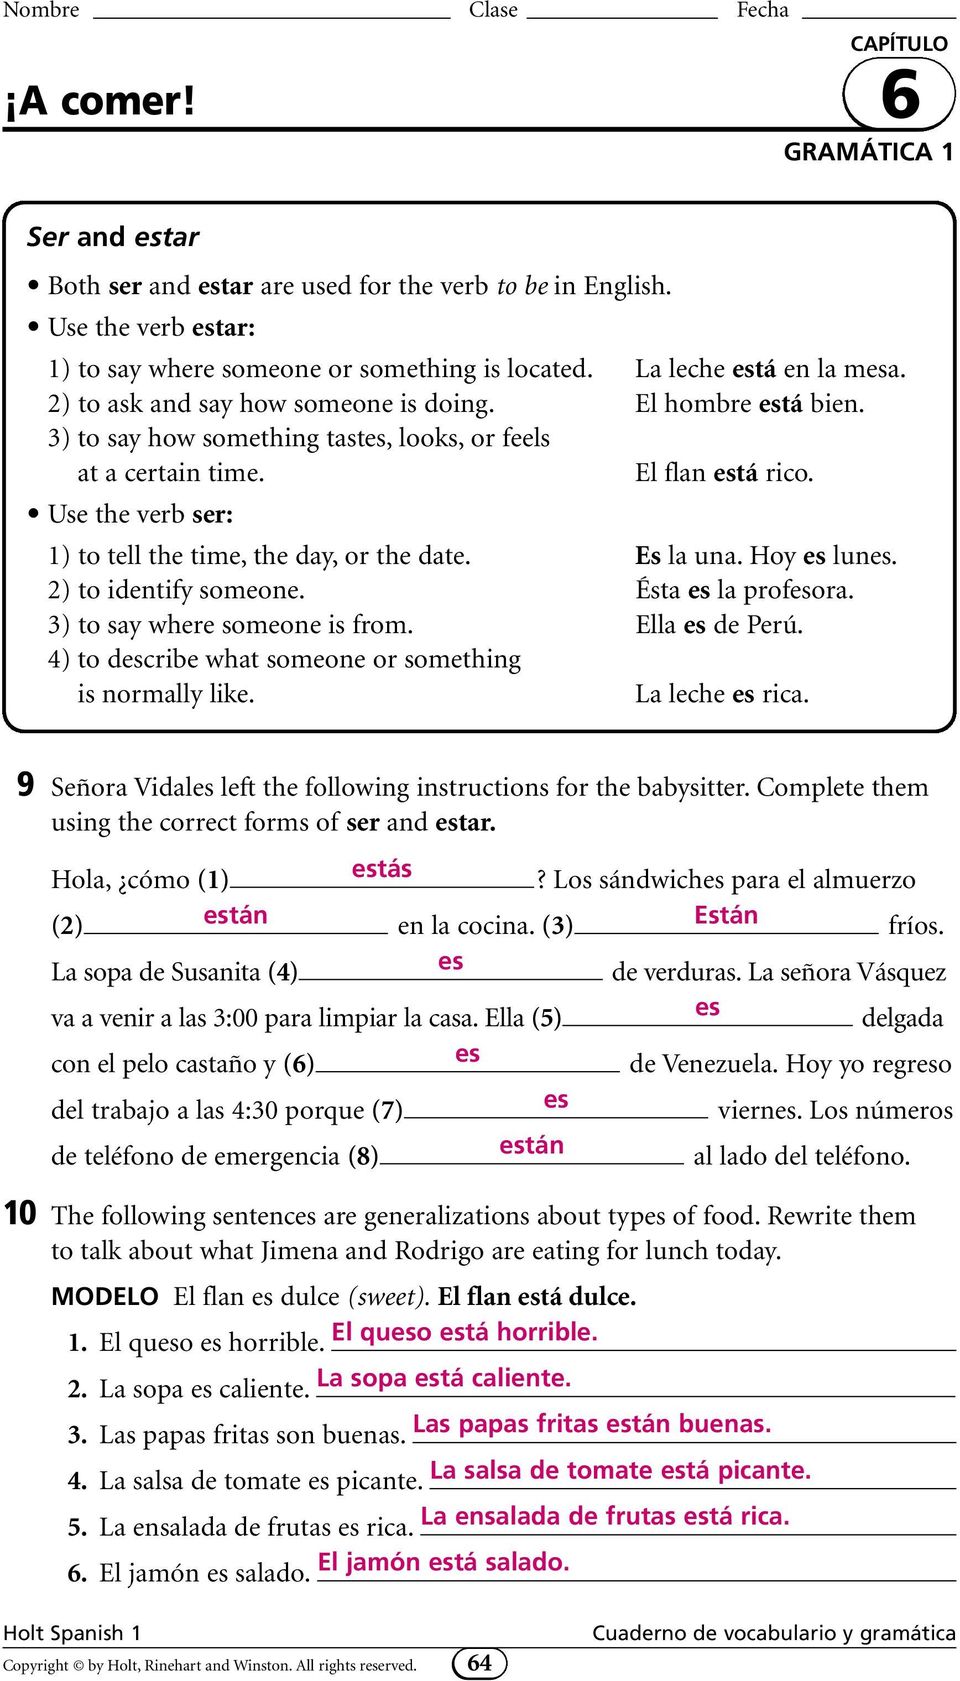 Use the verb ser: 1) to tell the time, the day, or the date. Es la una. Hoy lun. 2) to identify someone. Ésta la profora. 3) to say where someone is from. Ella de Perú.